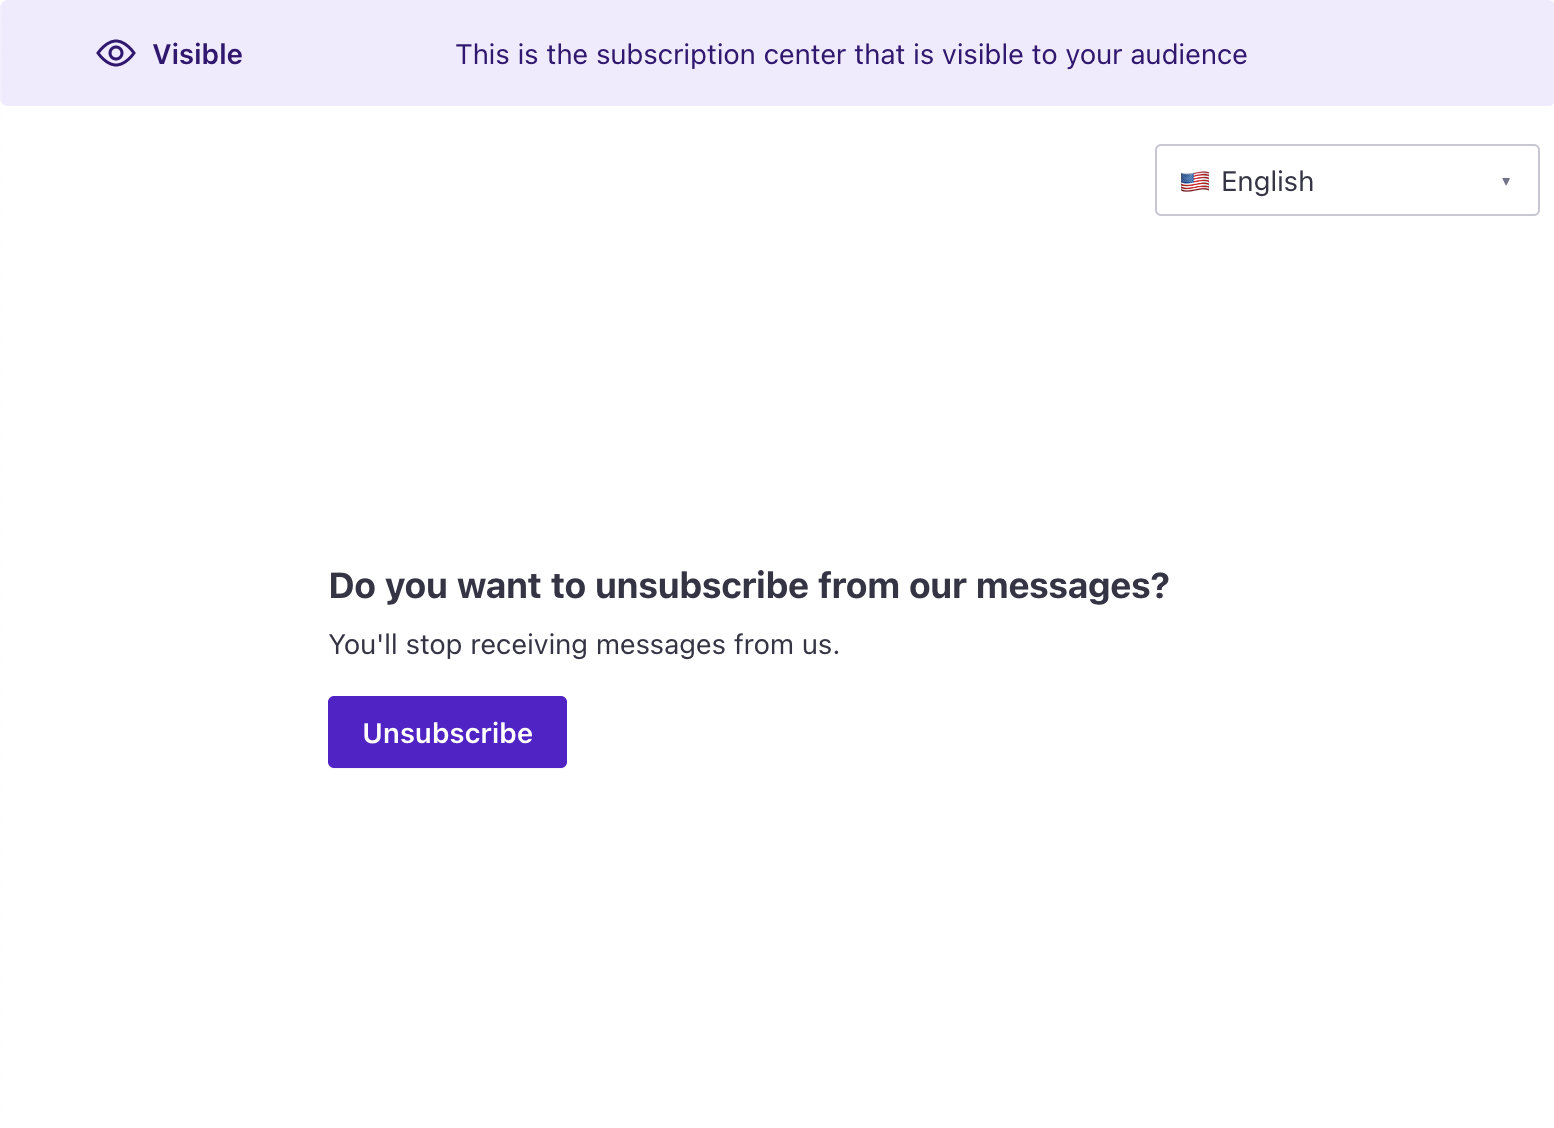 In the middle of the page is the question, 'Do you want to unsubscribe from our messages? You'll stop receiving messages from us.' Underneath that is the Unsubscribe button.